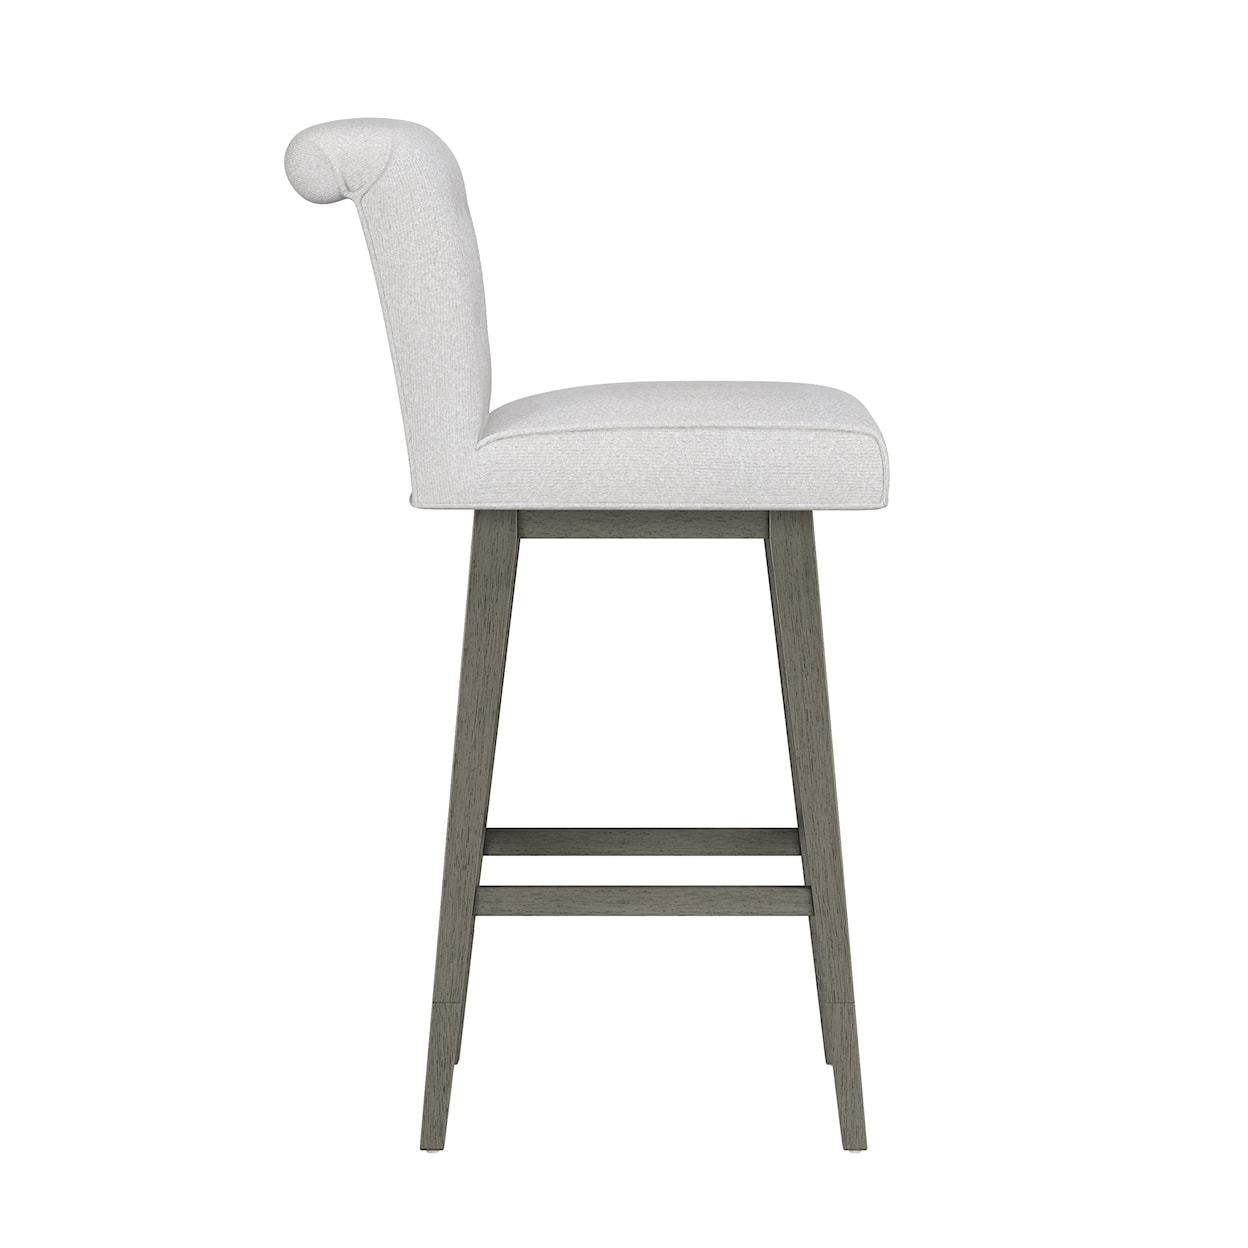 Hillsdale Uniquely Yours Tufted Adjustable Swivel Stool